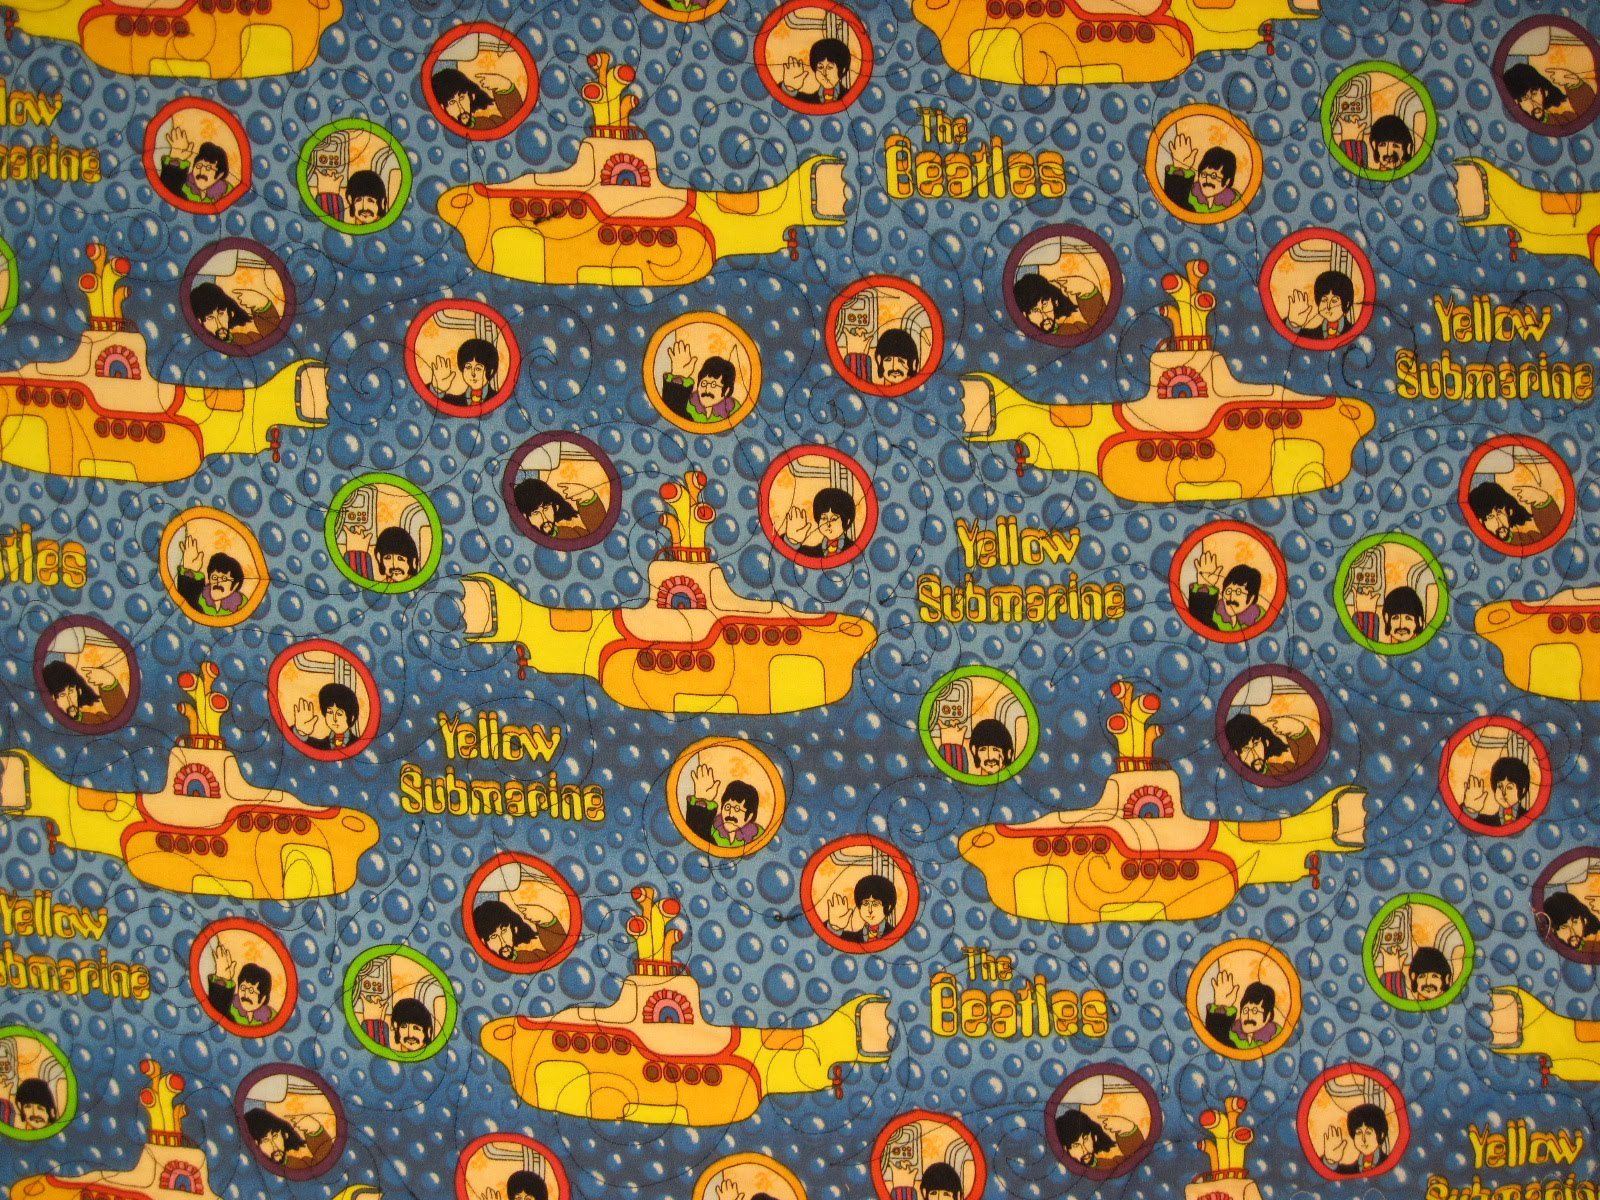 Had some left over Yellow Submarine fabric and other Beatles fabric so 1600x1200